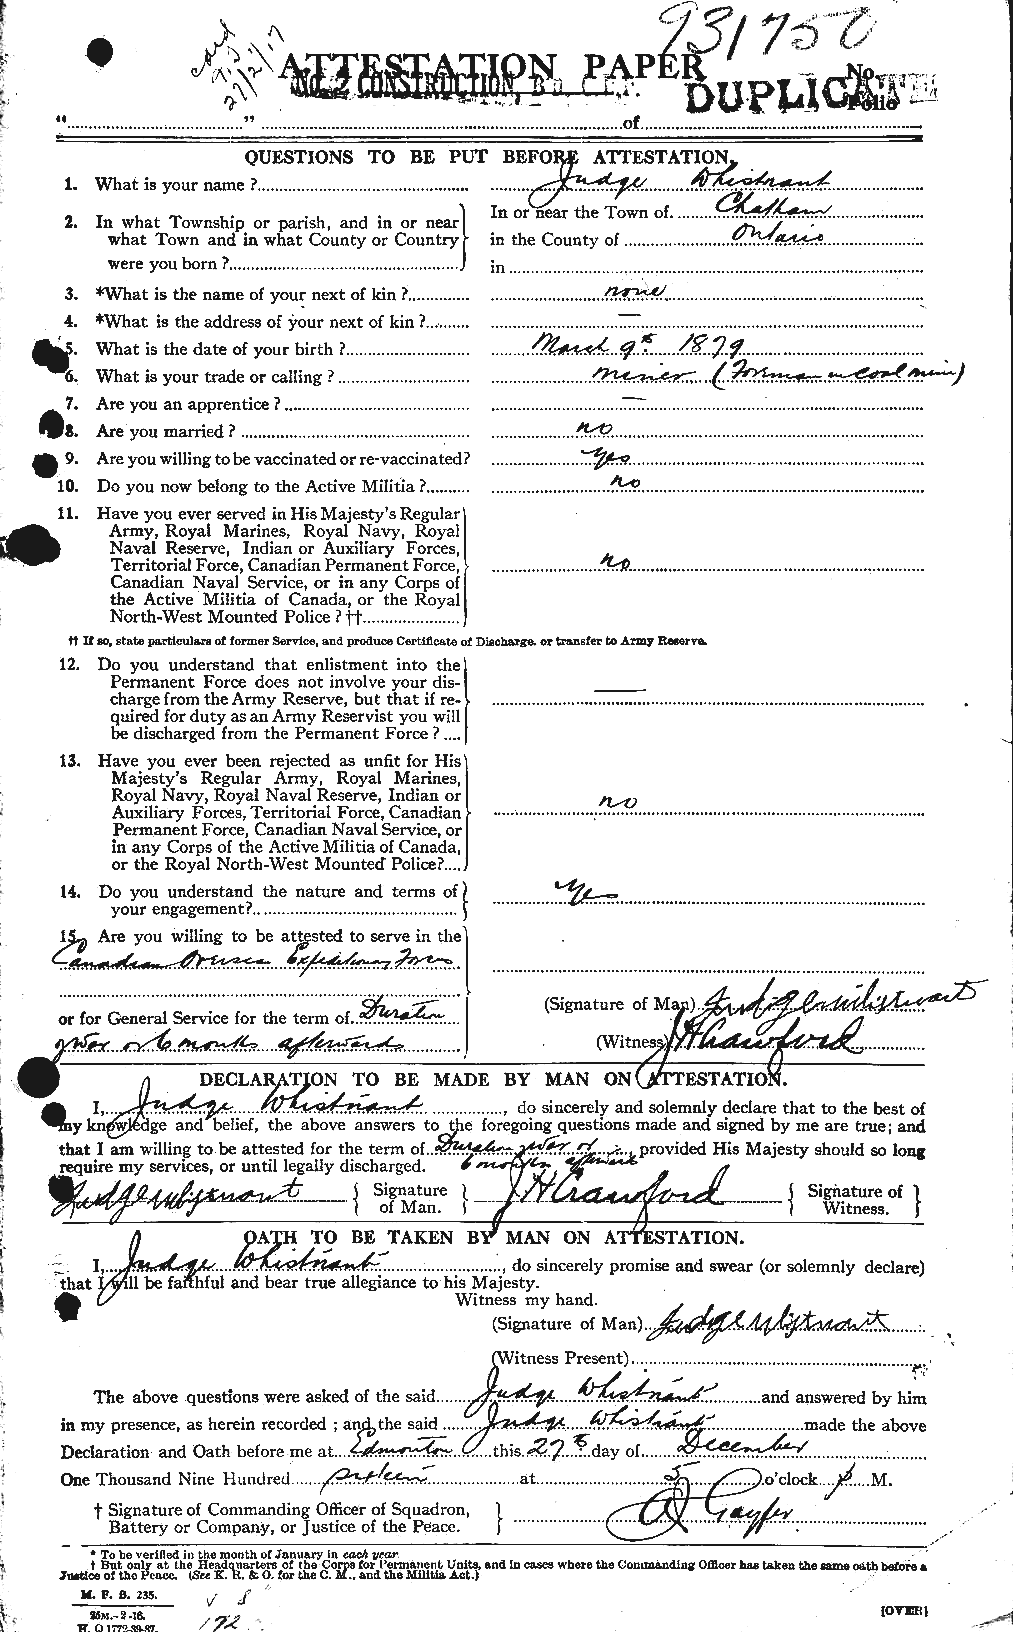 Personnel Records of the First World War - CEF 668790a